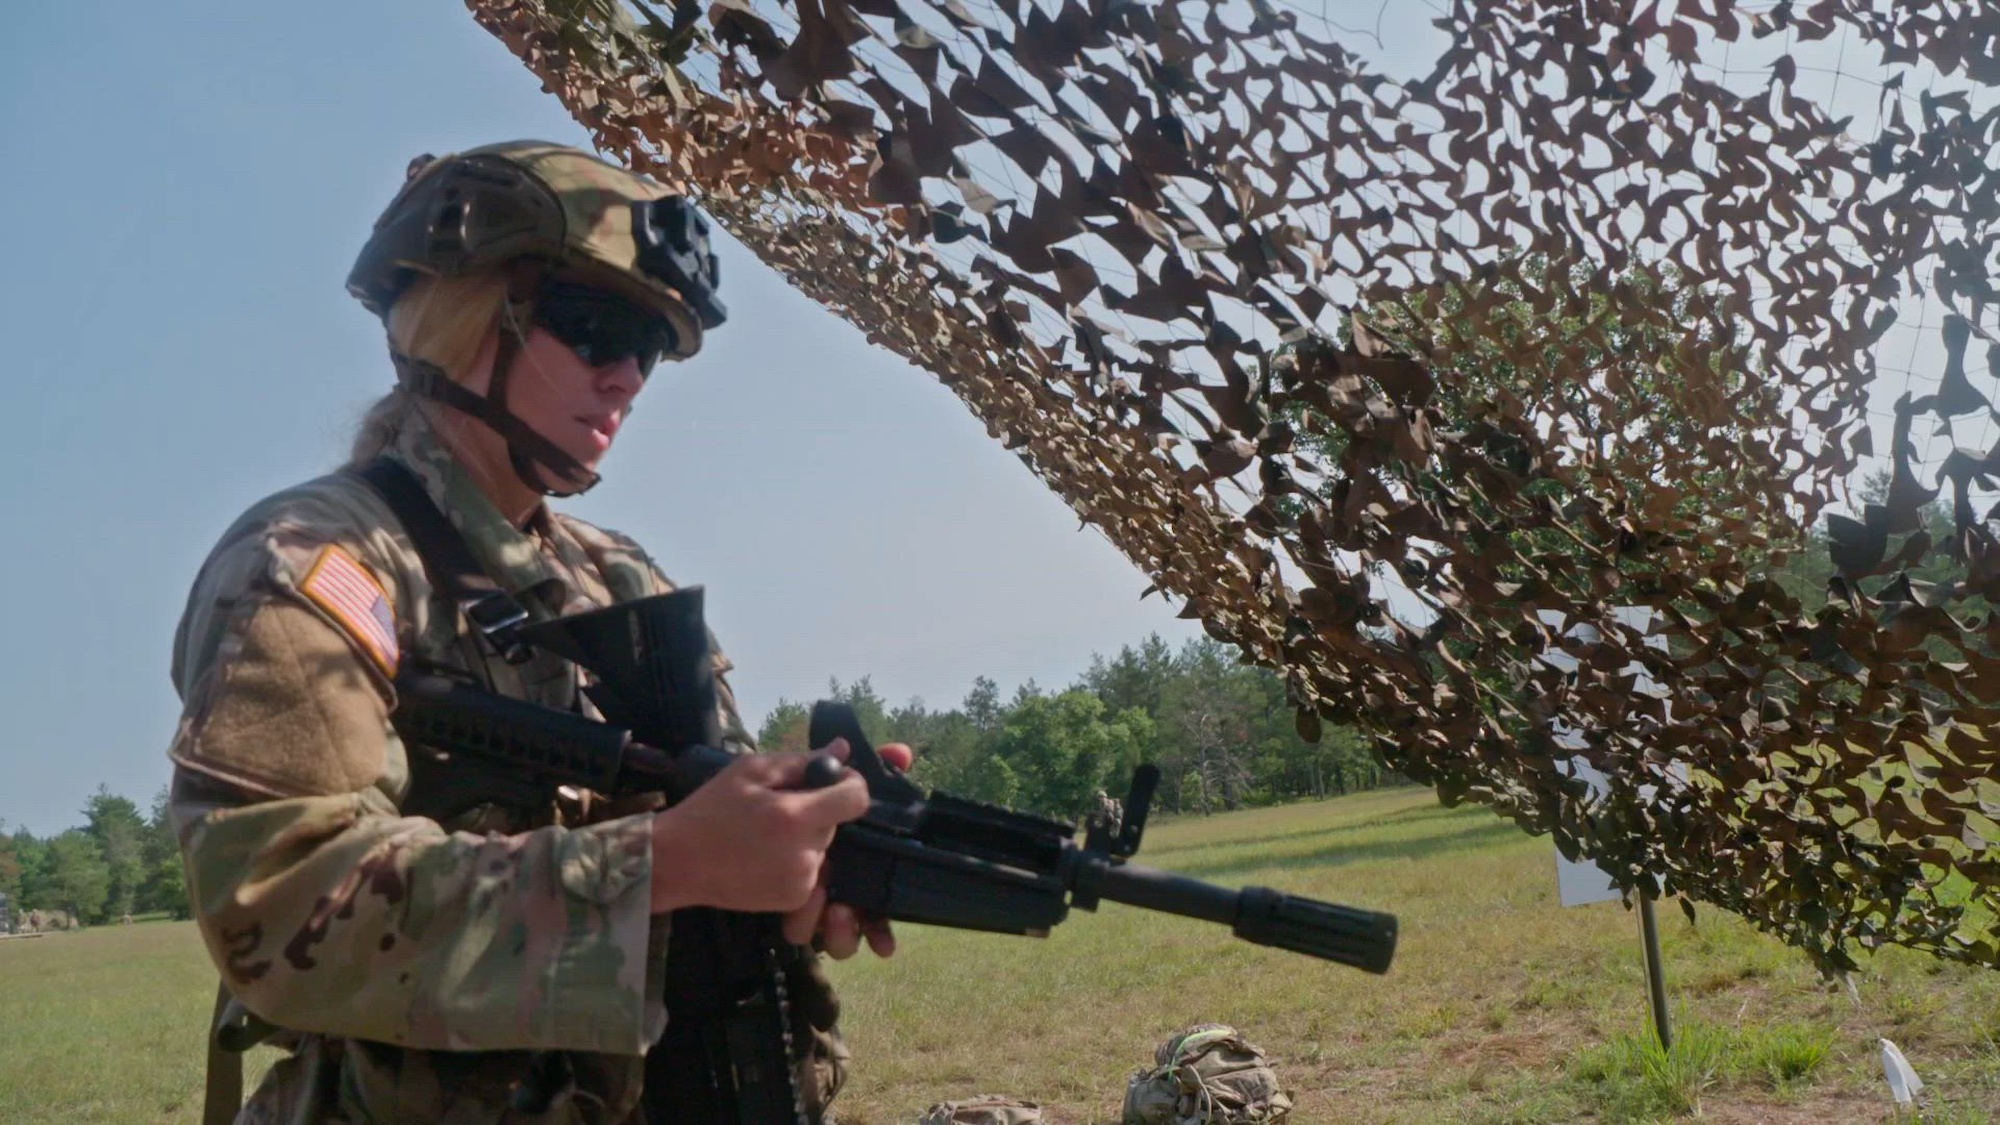 Expert Soldier Badge candidates are tasked with completing ten weapon system lanes, which require candidates to perform weapon related tasks such as load and unload, correct malfunctions, and a functions check. The candidates must successfully complete all ten tasks and only have one no go for the day. Weapon systems shown in this video include: M26 modular accessory shotgun, AT4, M240B machine gun, M17 pistol, M249 squad automatic weapon and M2 machine gun. Soldiers from all three U.S. Army components, reserve, national guard and active, attempting to earn the Expert Soldier Badge must successfully complete various physical and mental tasks such as: an expert physical fitness assessment, day and night land navigation, Soldier tasks including weapons, medical and patrol procedures, and finally a ruck march. Successfully completing these tasks, Soldiers will earn the Expert Soldier Badge.